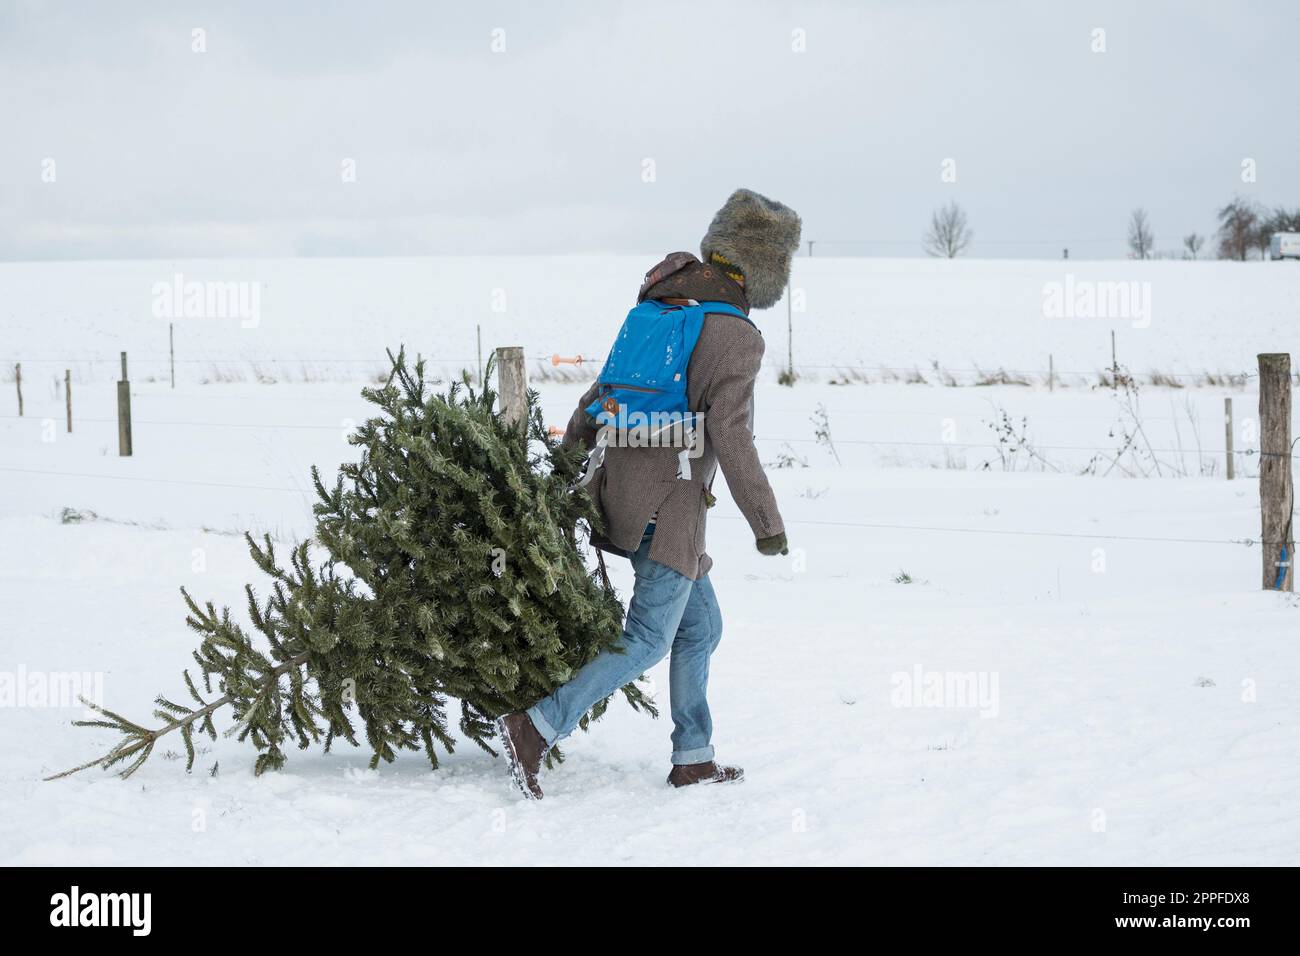 Young man carrying christmas tree in snowy landscape, Bavaria, Germany Stock Photo